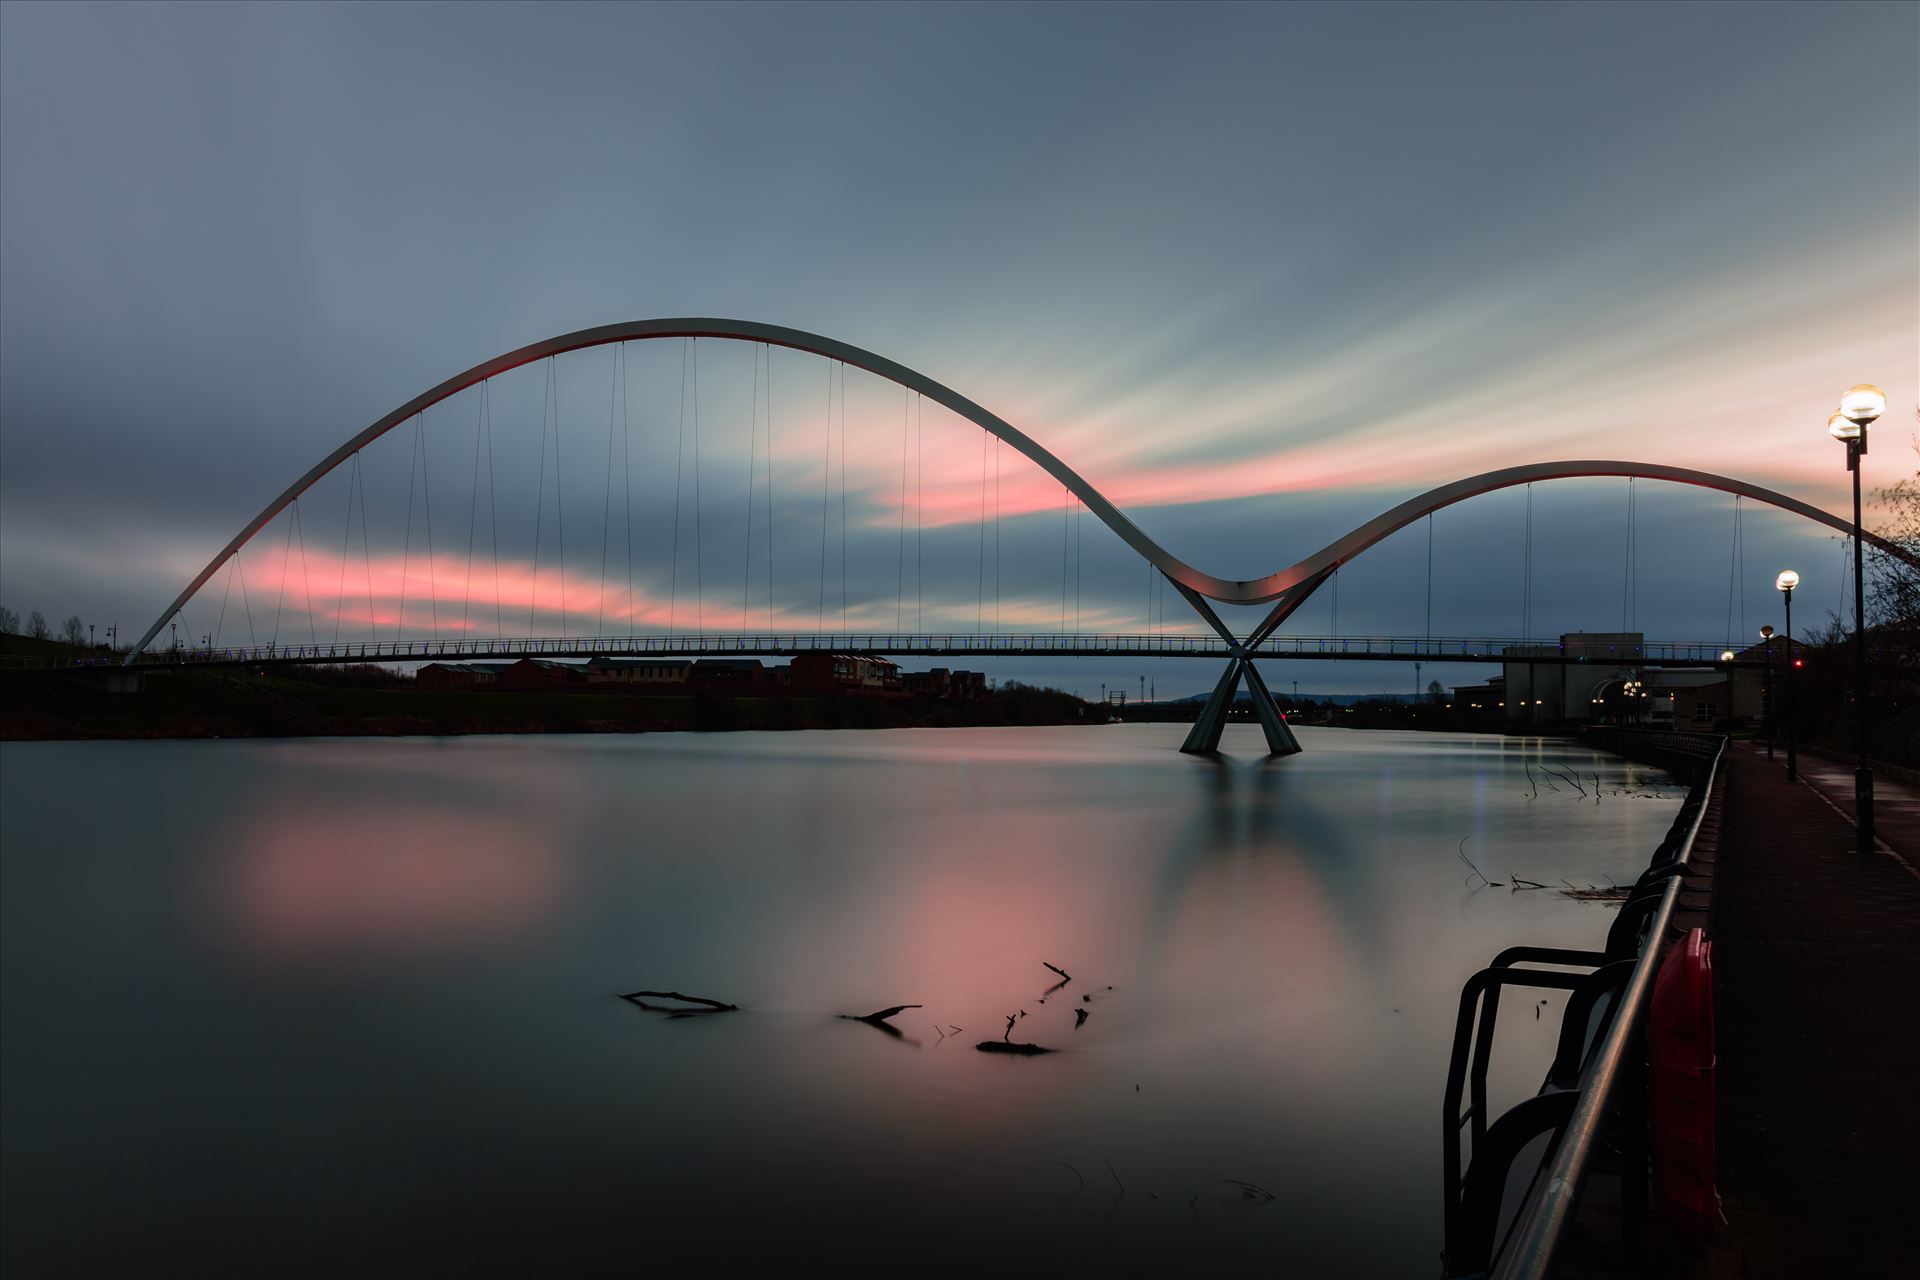 The Infinity Bridge 13 - The Infinity Bridge is a public pedestrian and cycle footbridge across the River Tees that was officially opened on 14 May 2009 at a cost of £15 million. by philreay